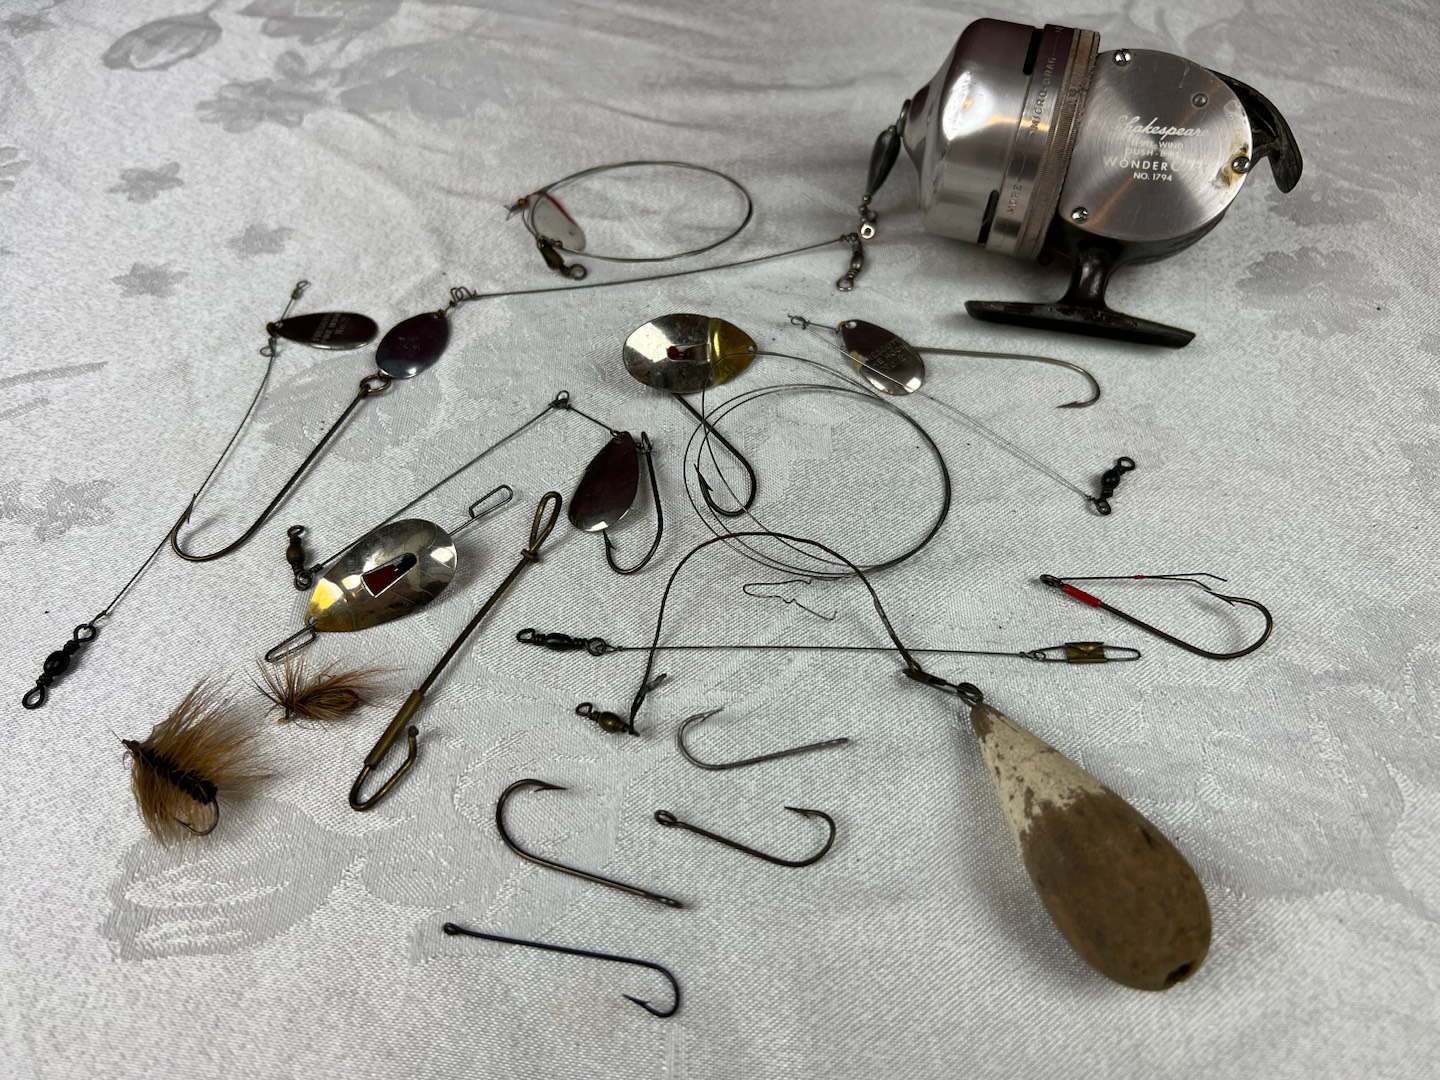 Lot of fishing equipment and accessories - PS Auction - We value